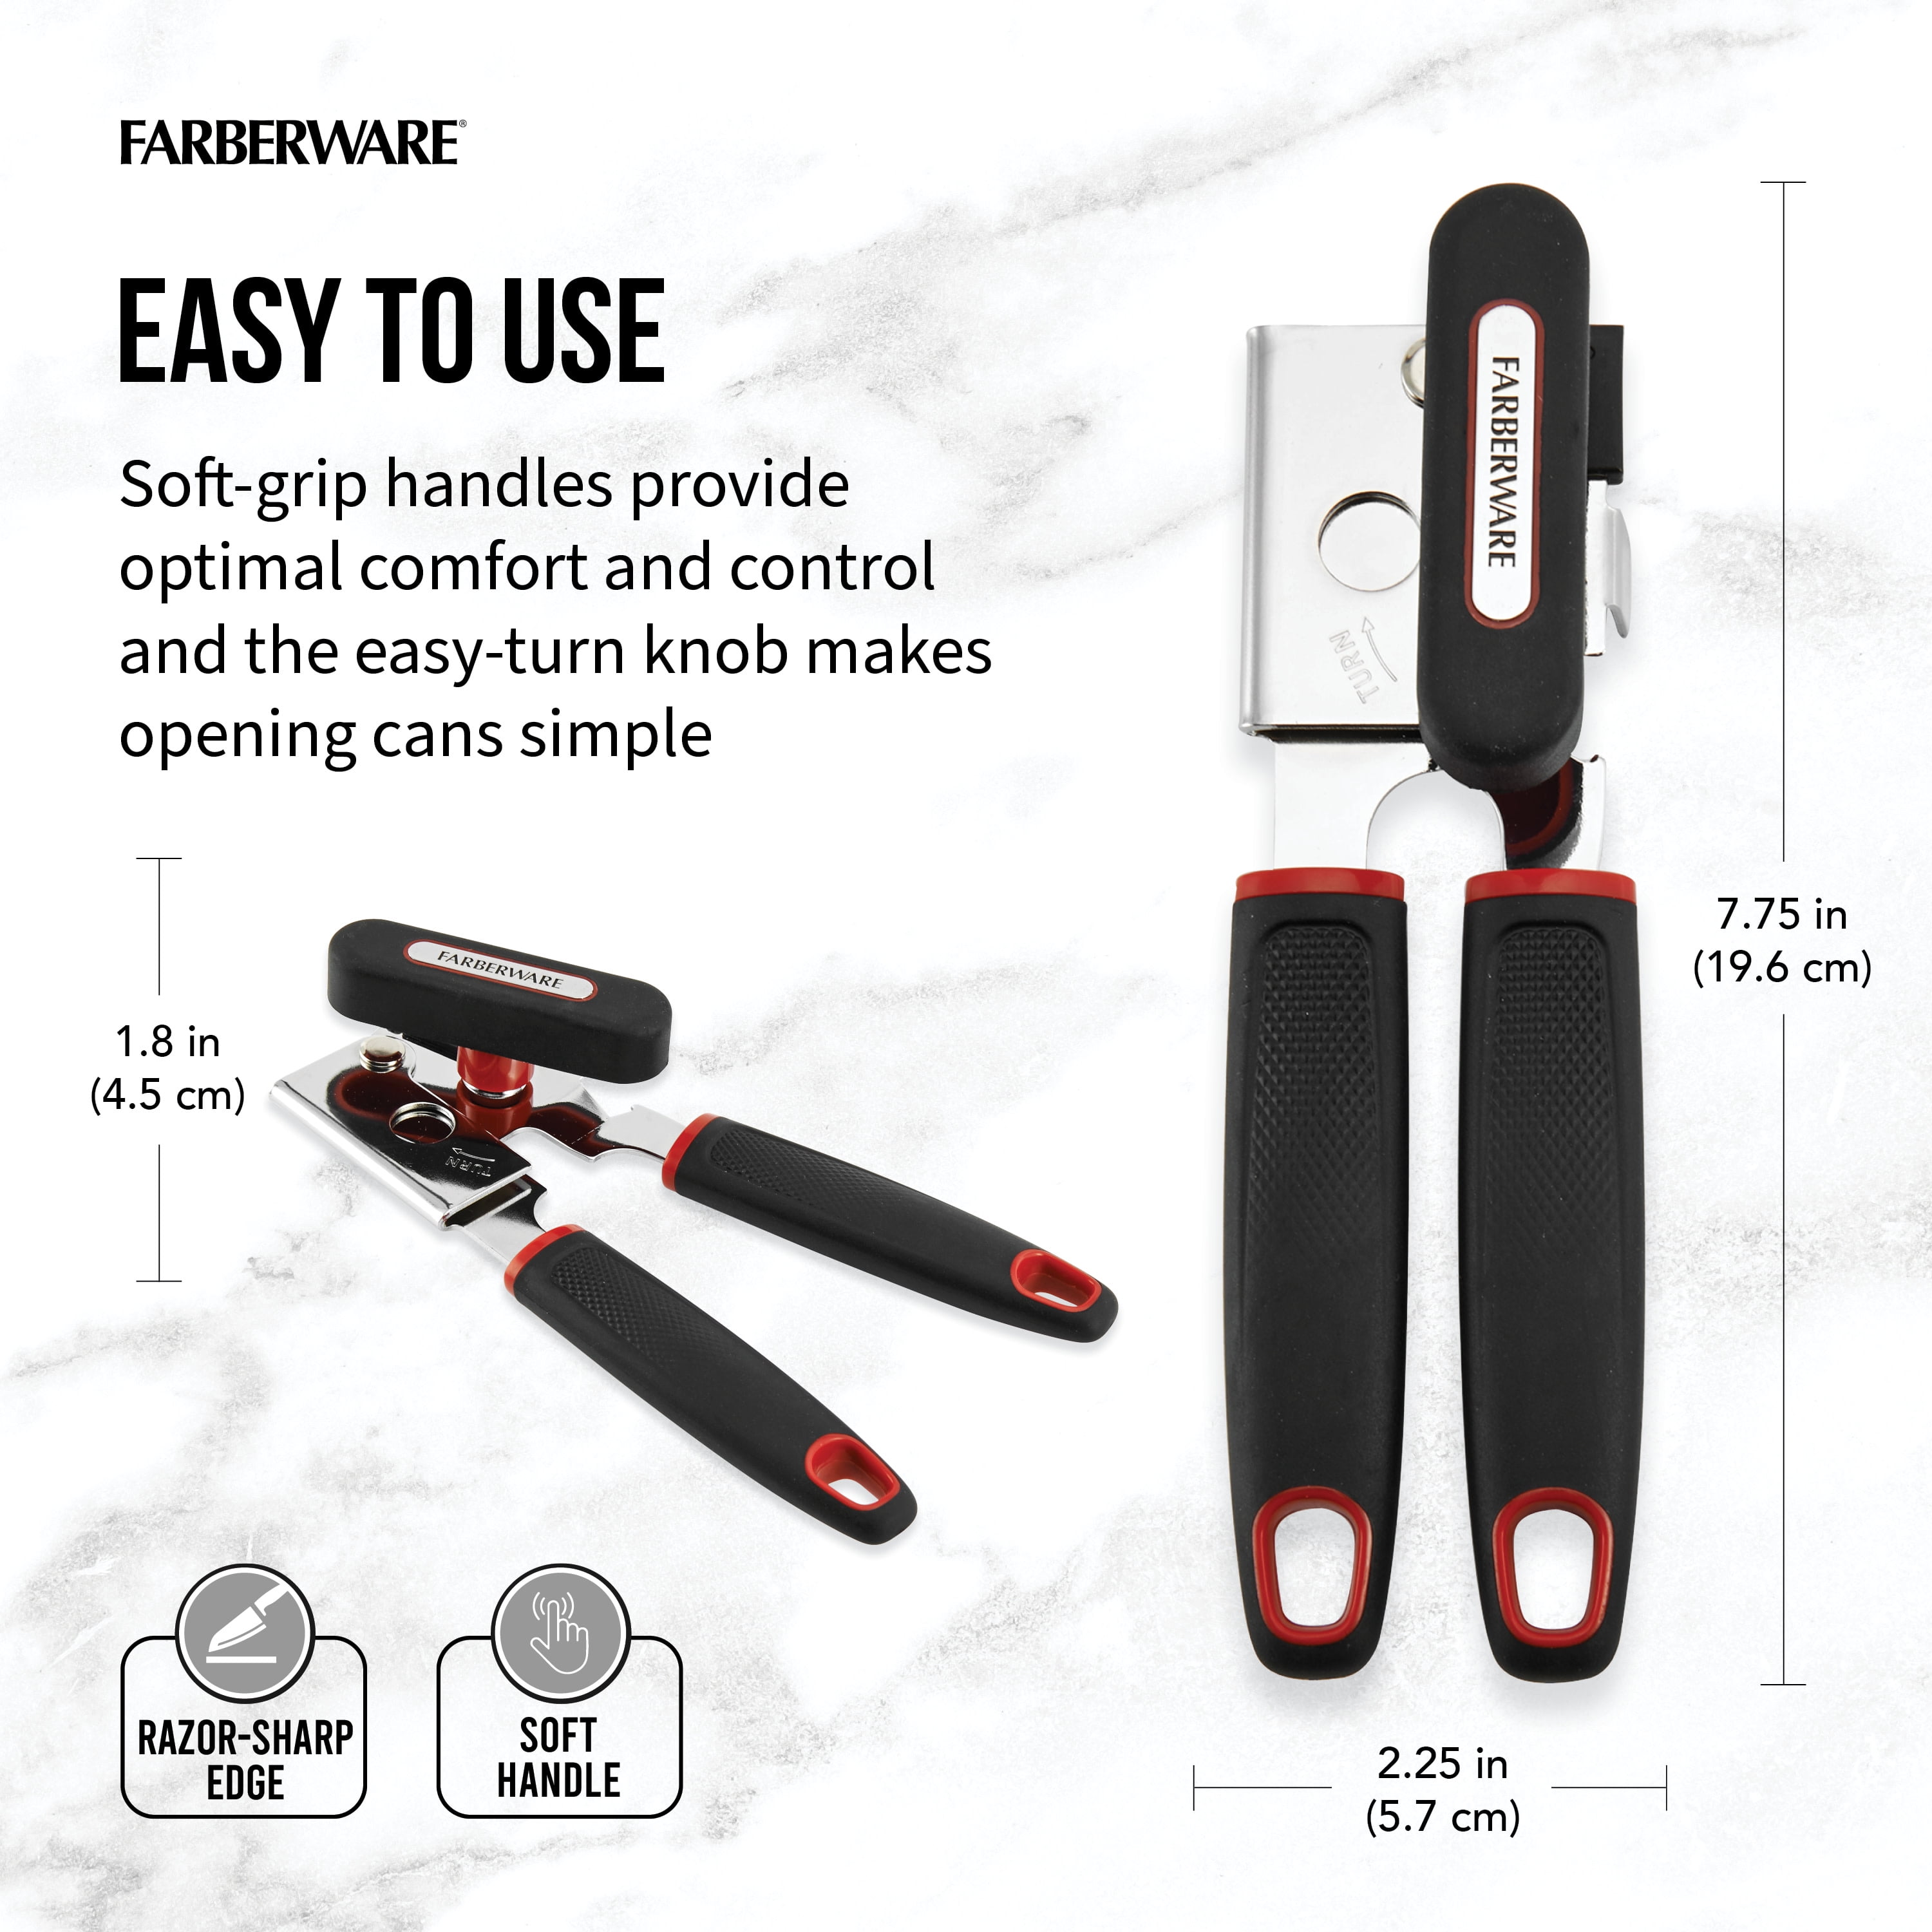 Farberware Soft Grips Garlic Press with Black Handle and Red Accent